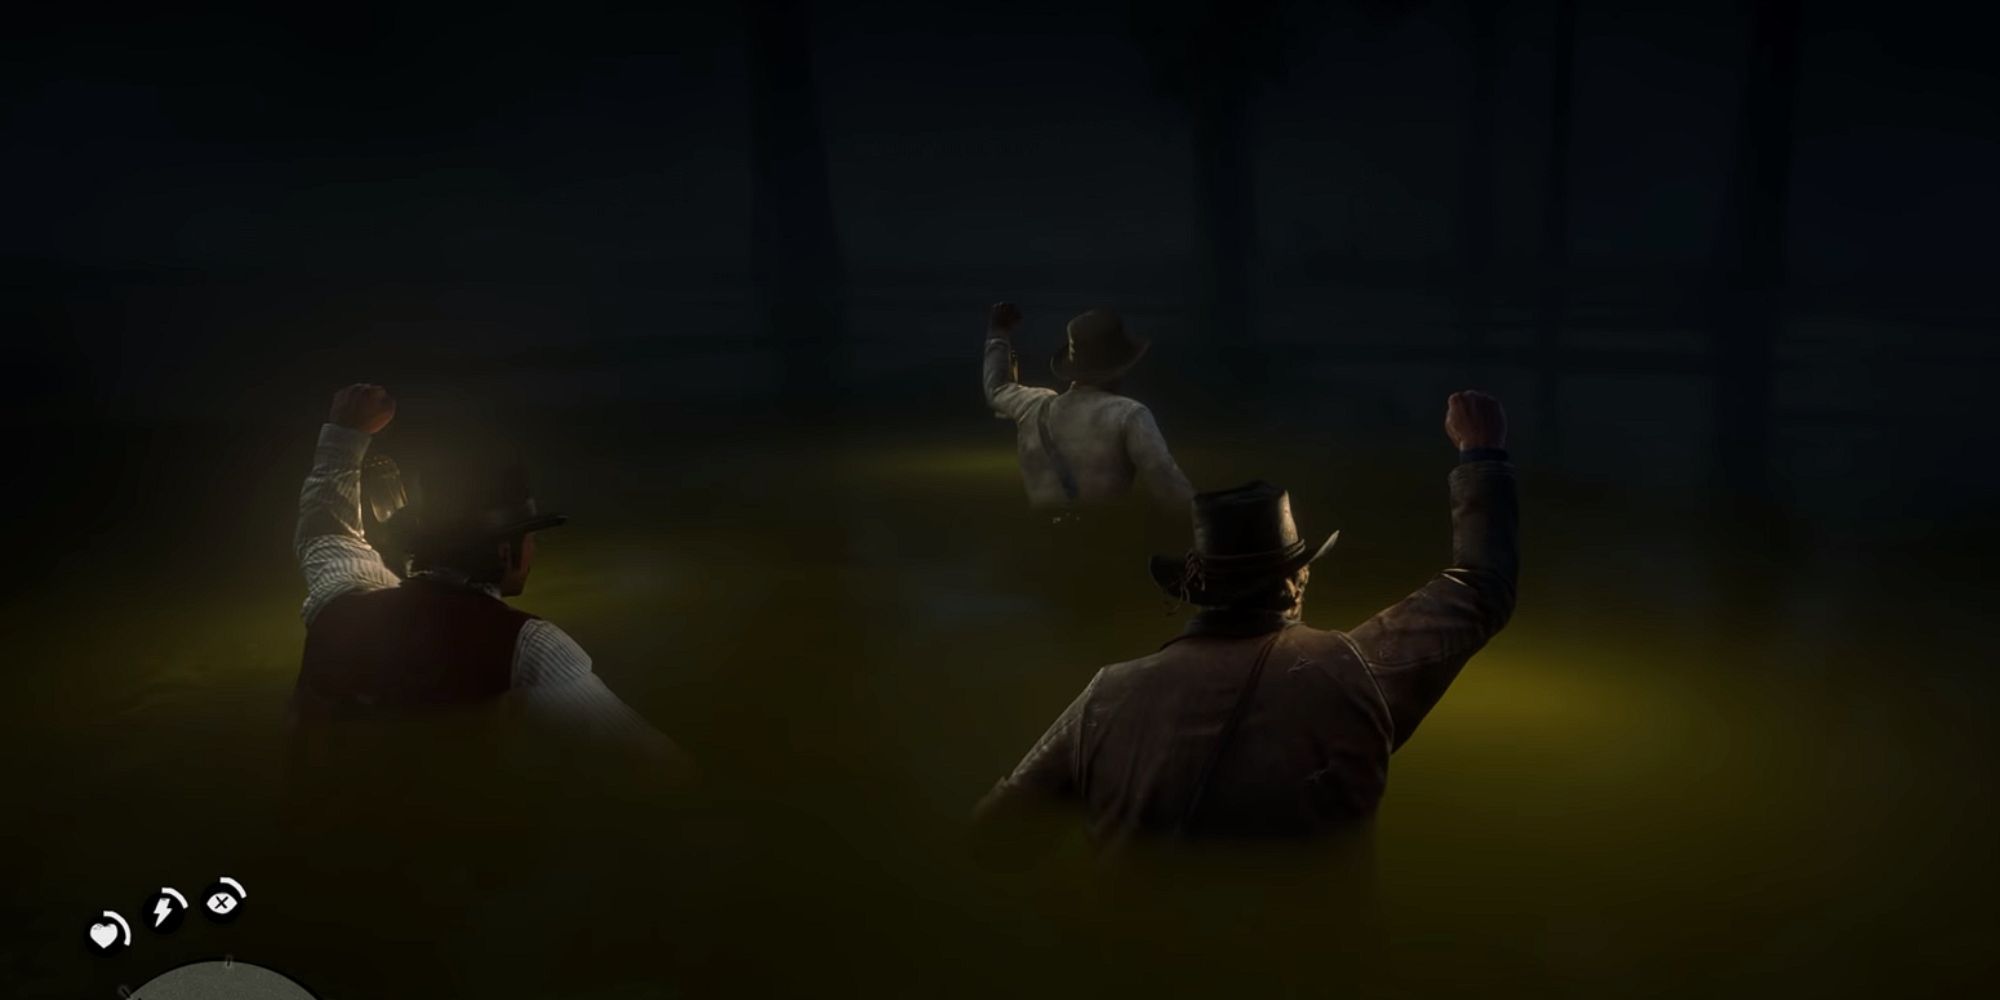 Arthur, Dutch, and Thomas walk chest-deep in the murky swamp at night while holding their lanterns out 